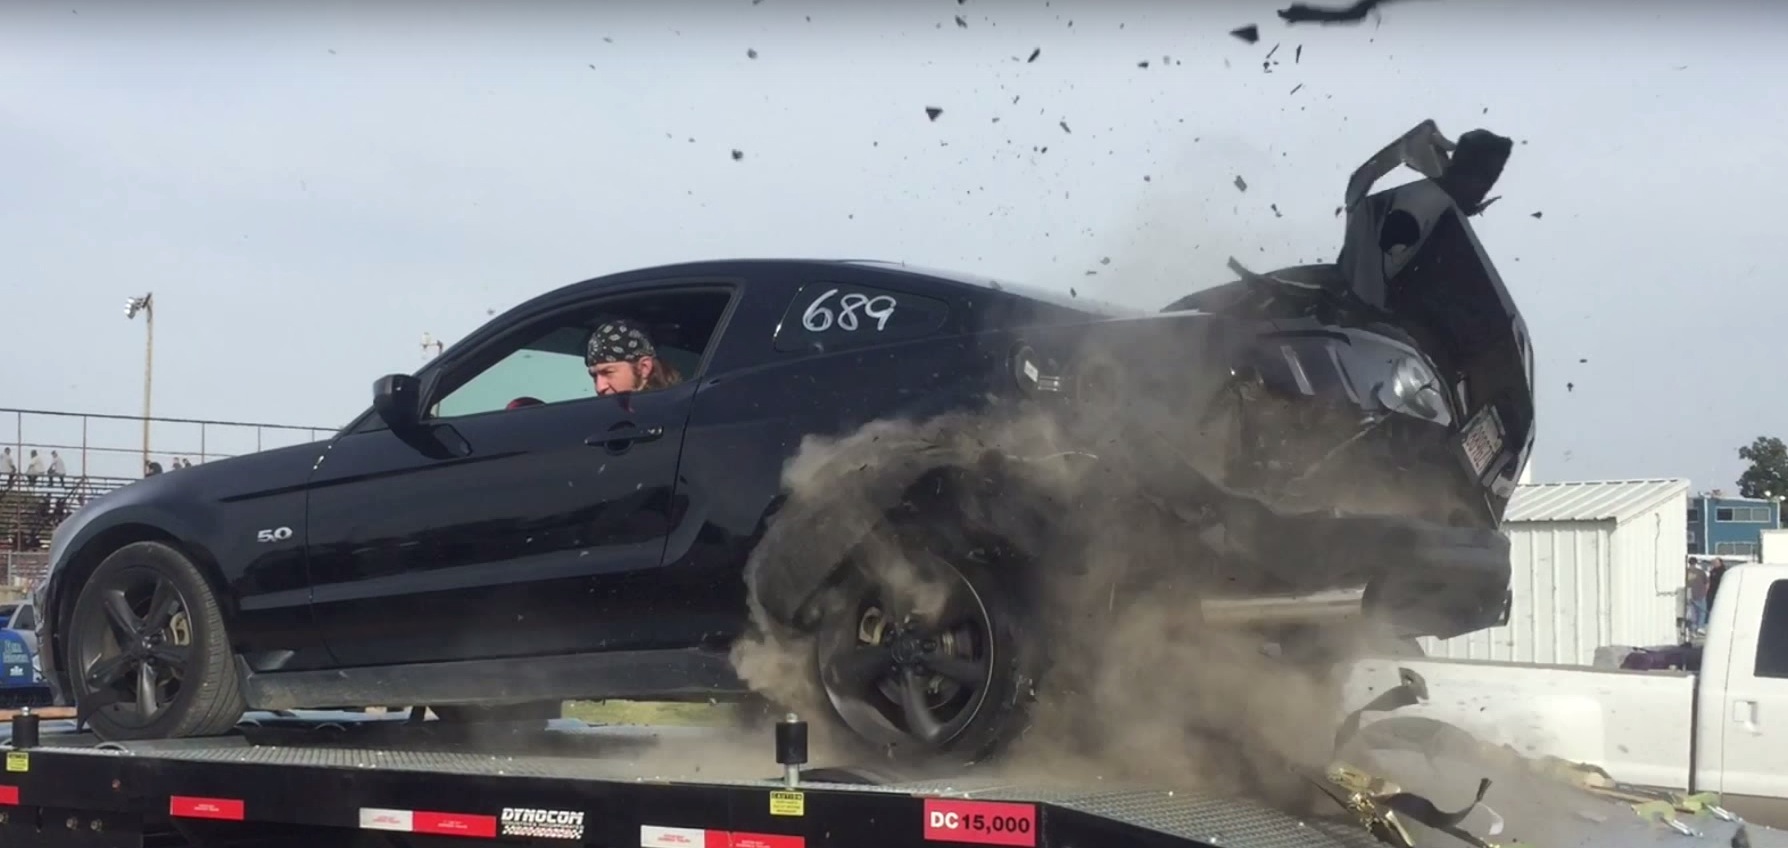 mustang-gt-blows-tire-on-dyno-at-150-mph-flying-rubber-acts-as-projectile-video-101146_1